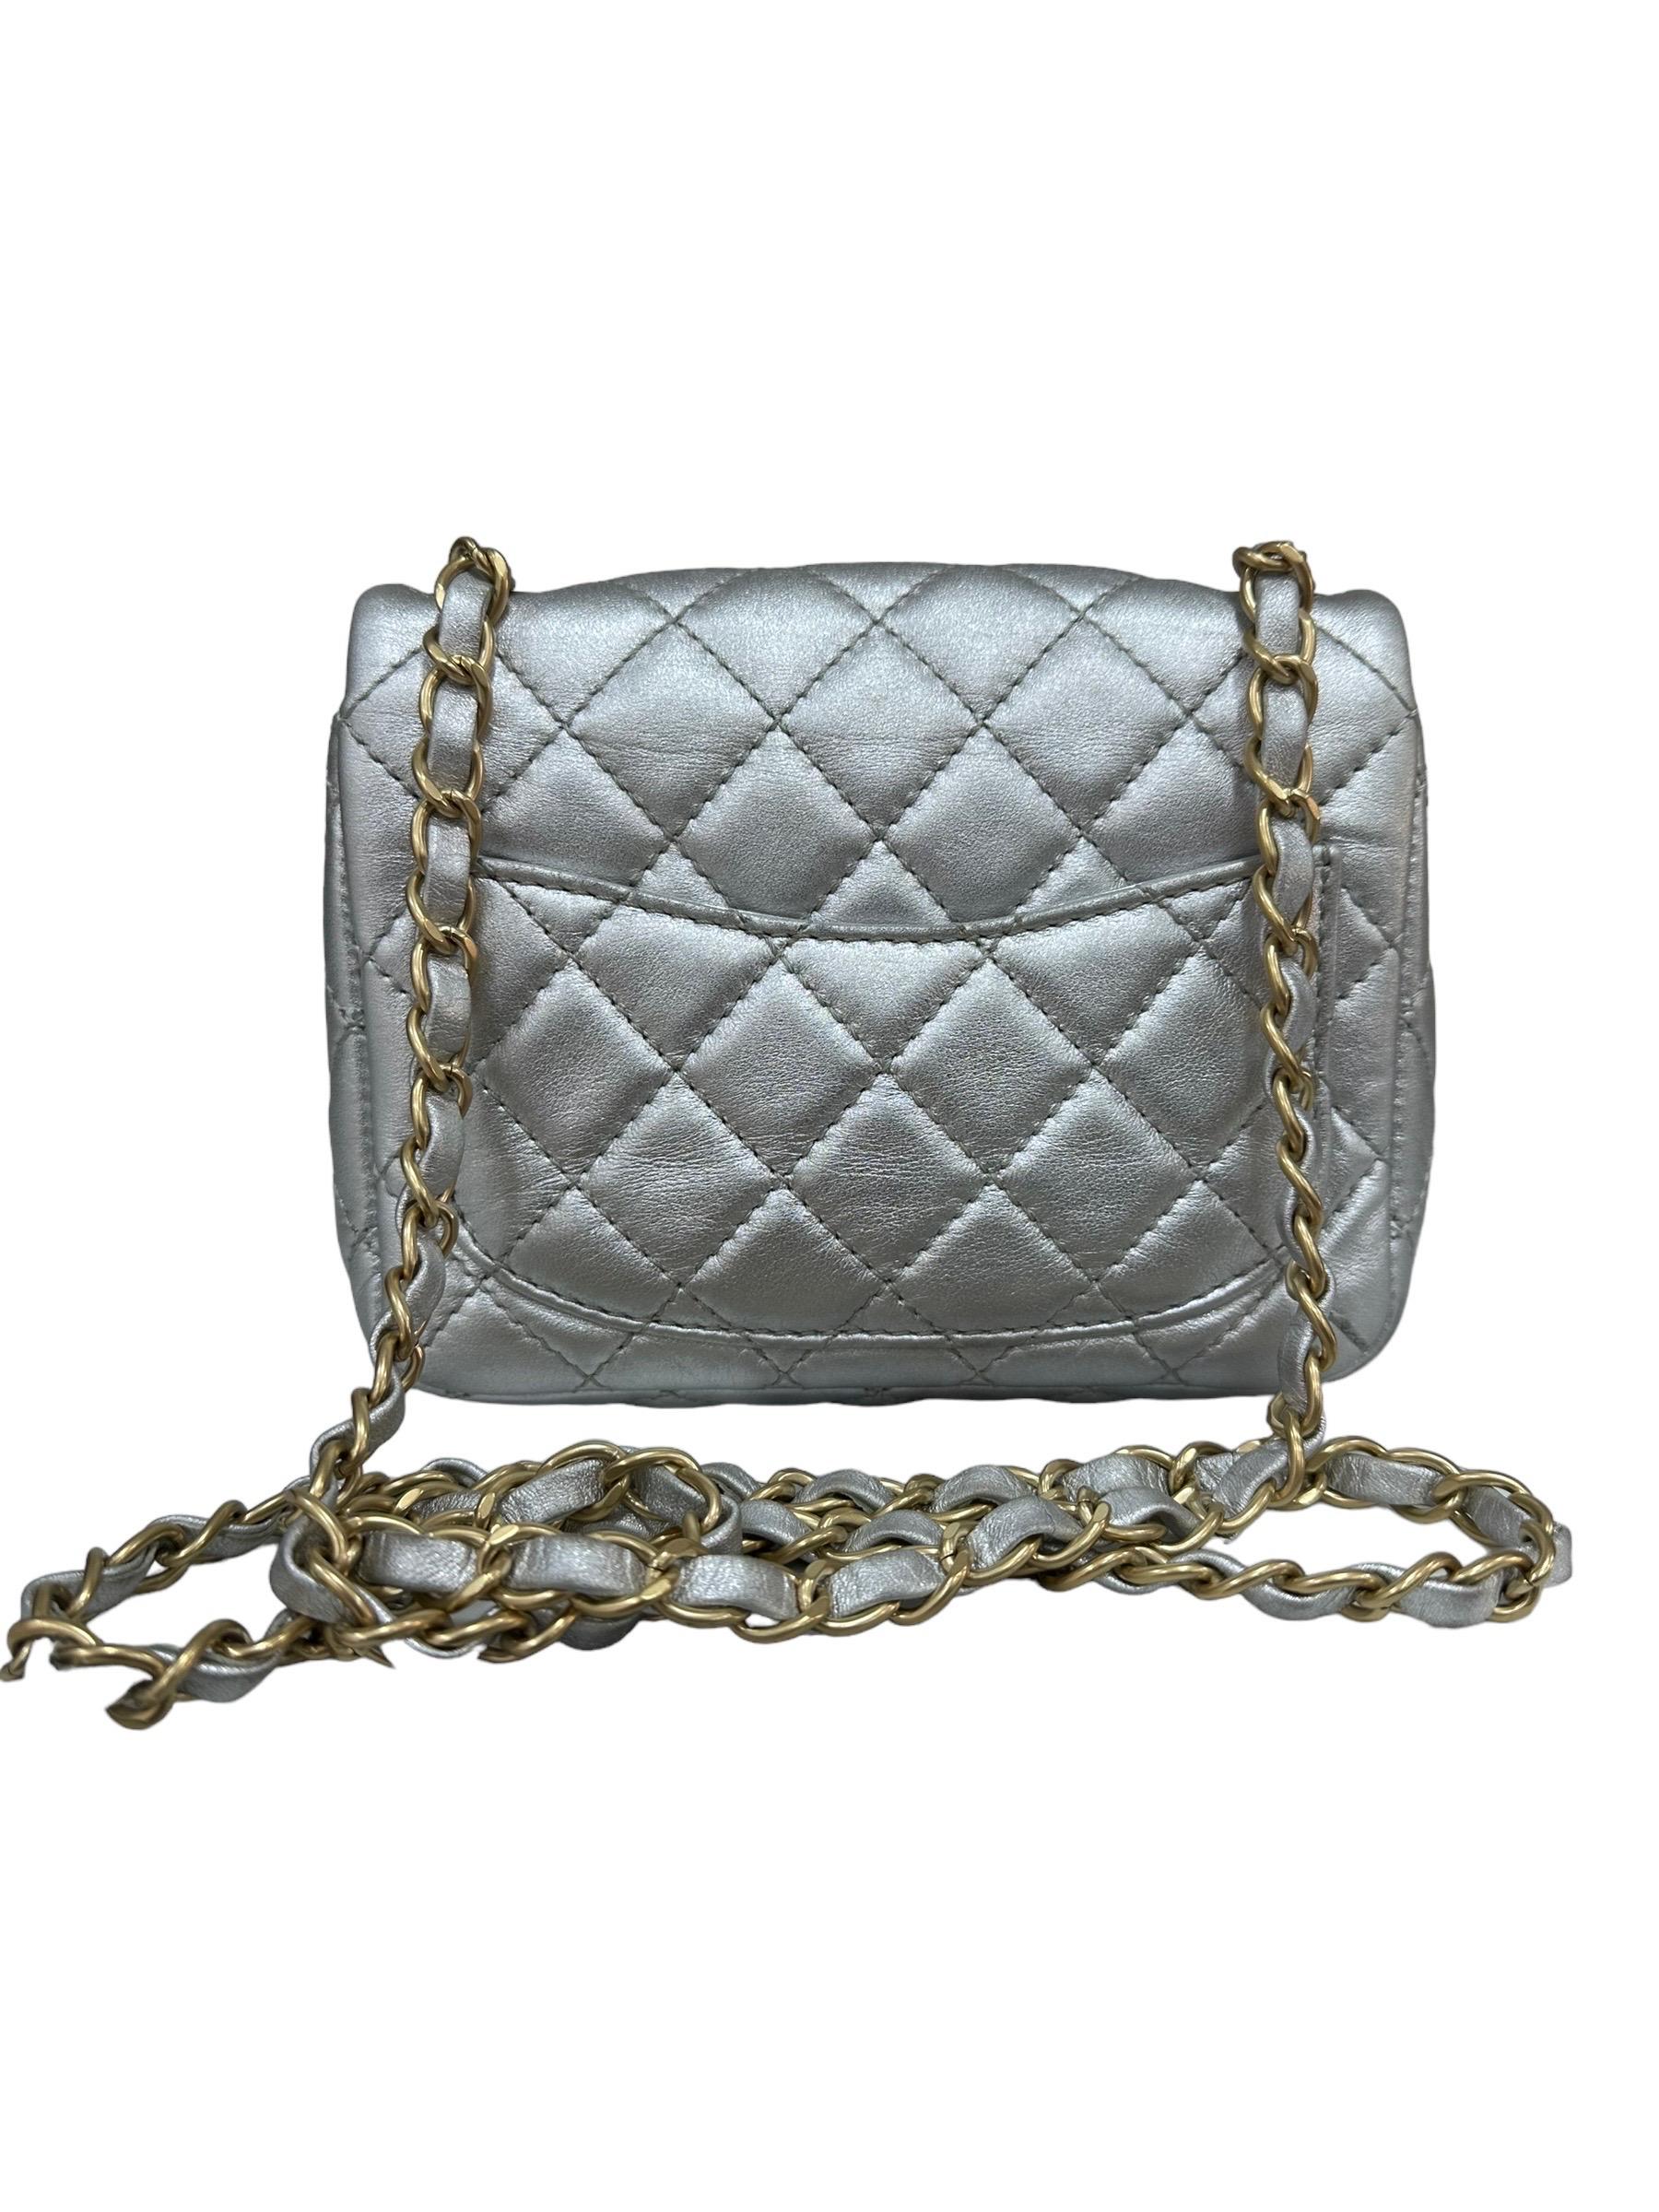 2009 Chanel Timeless Mini Flap Silver Leather  1